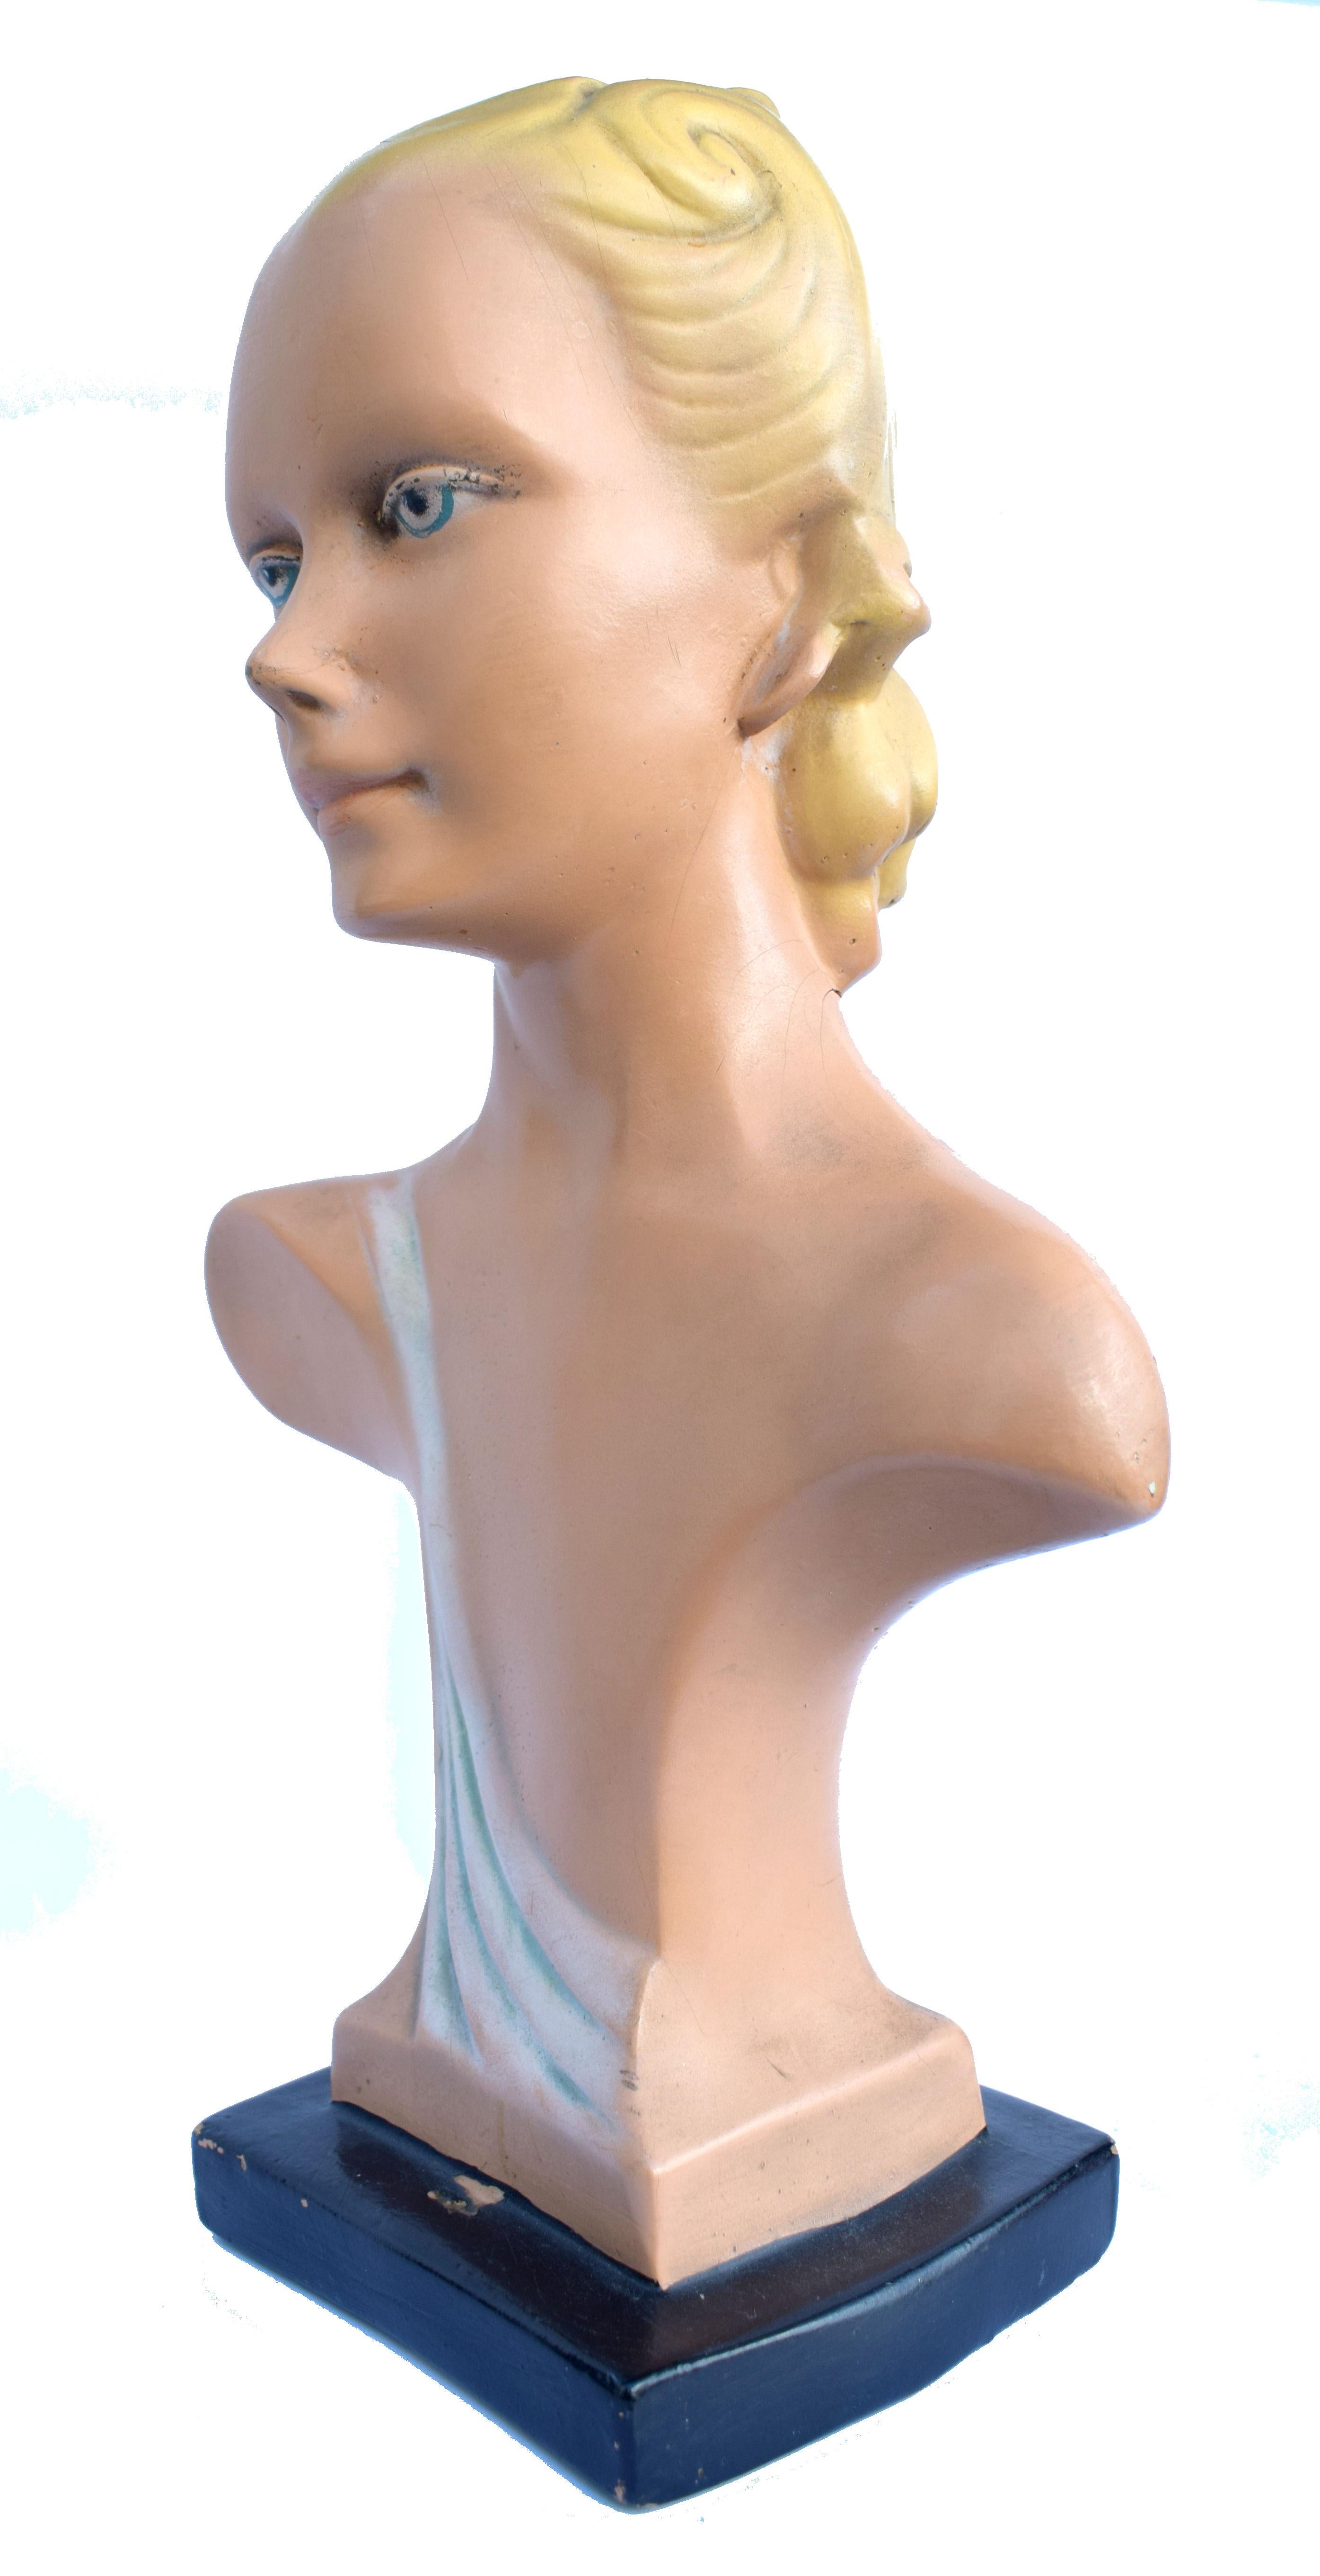 Wonderfully stylish and completely original 1930s Art Deco female mannequin. She's made from compressed board, similar to papier maché and then skillfully layer of plaster and hand painted on top. She's very typical of Deco mannequins with stylized